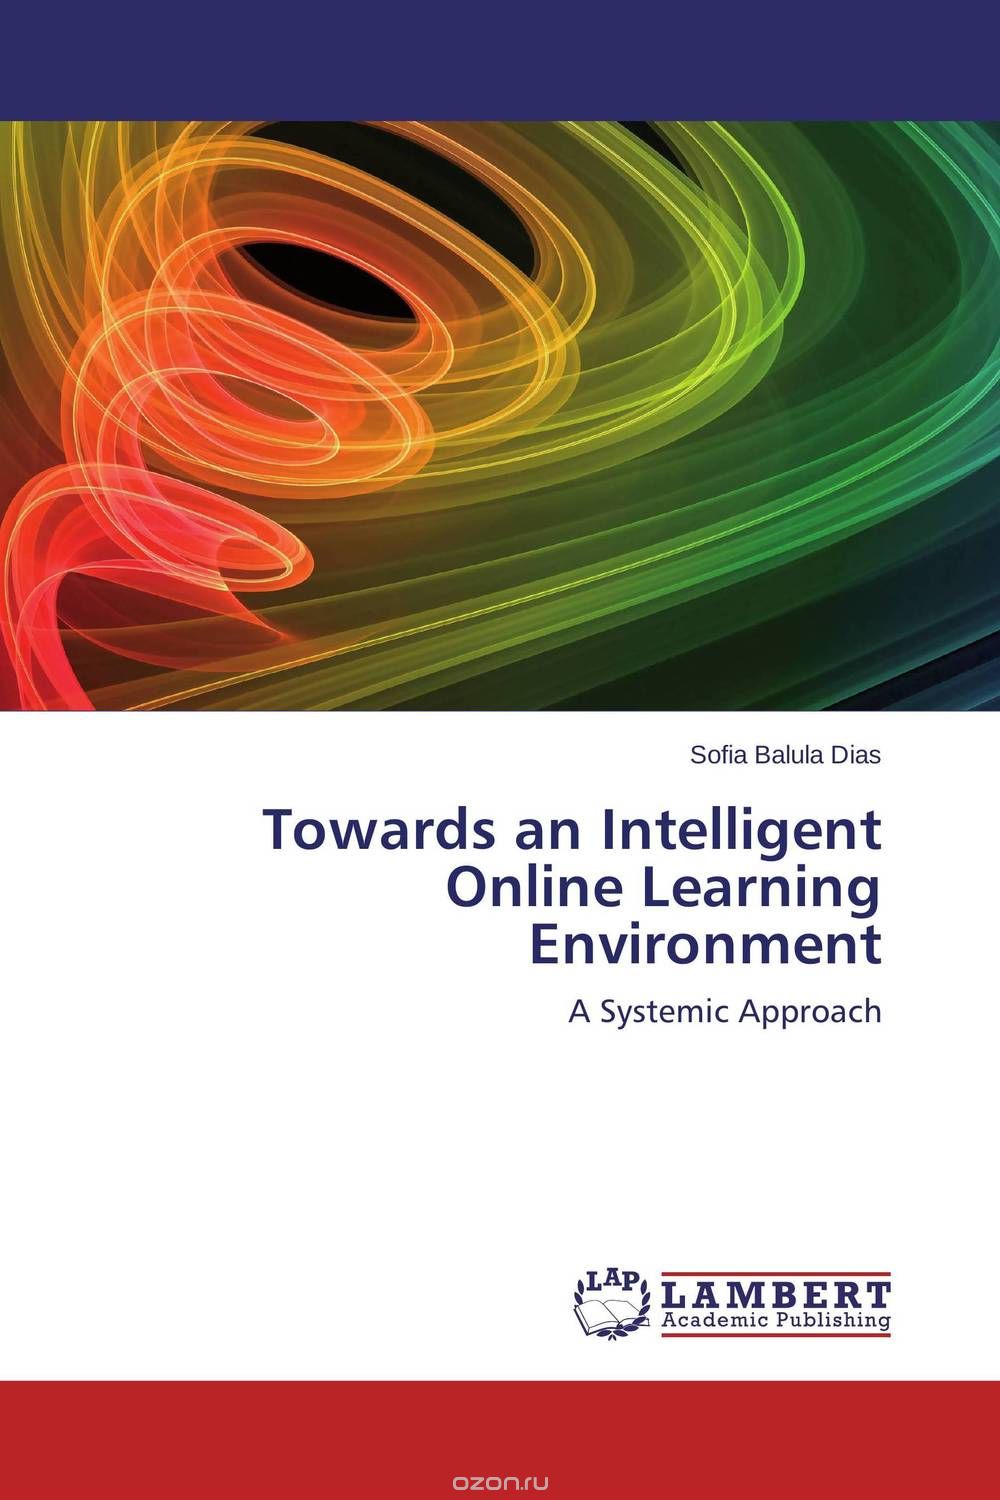 Towards an Intelligent Online Learning Environment